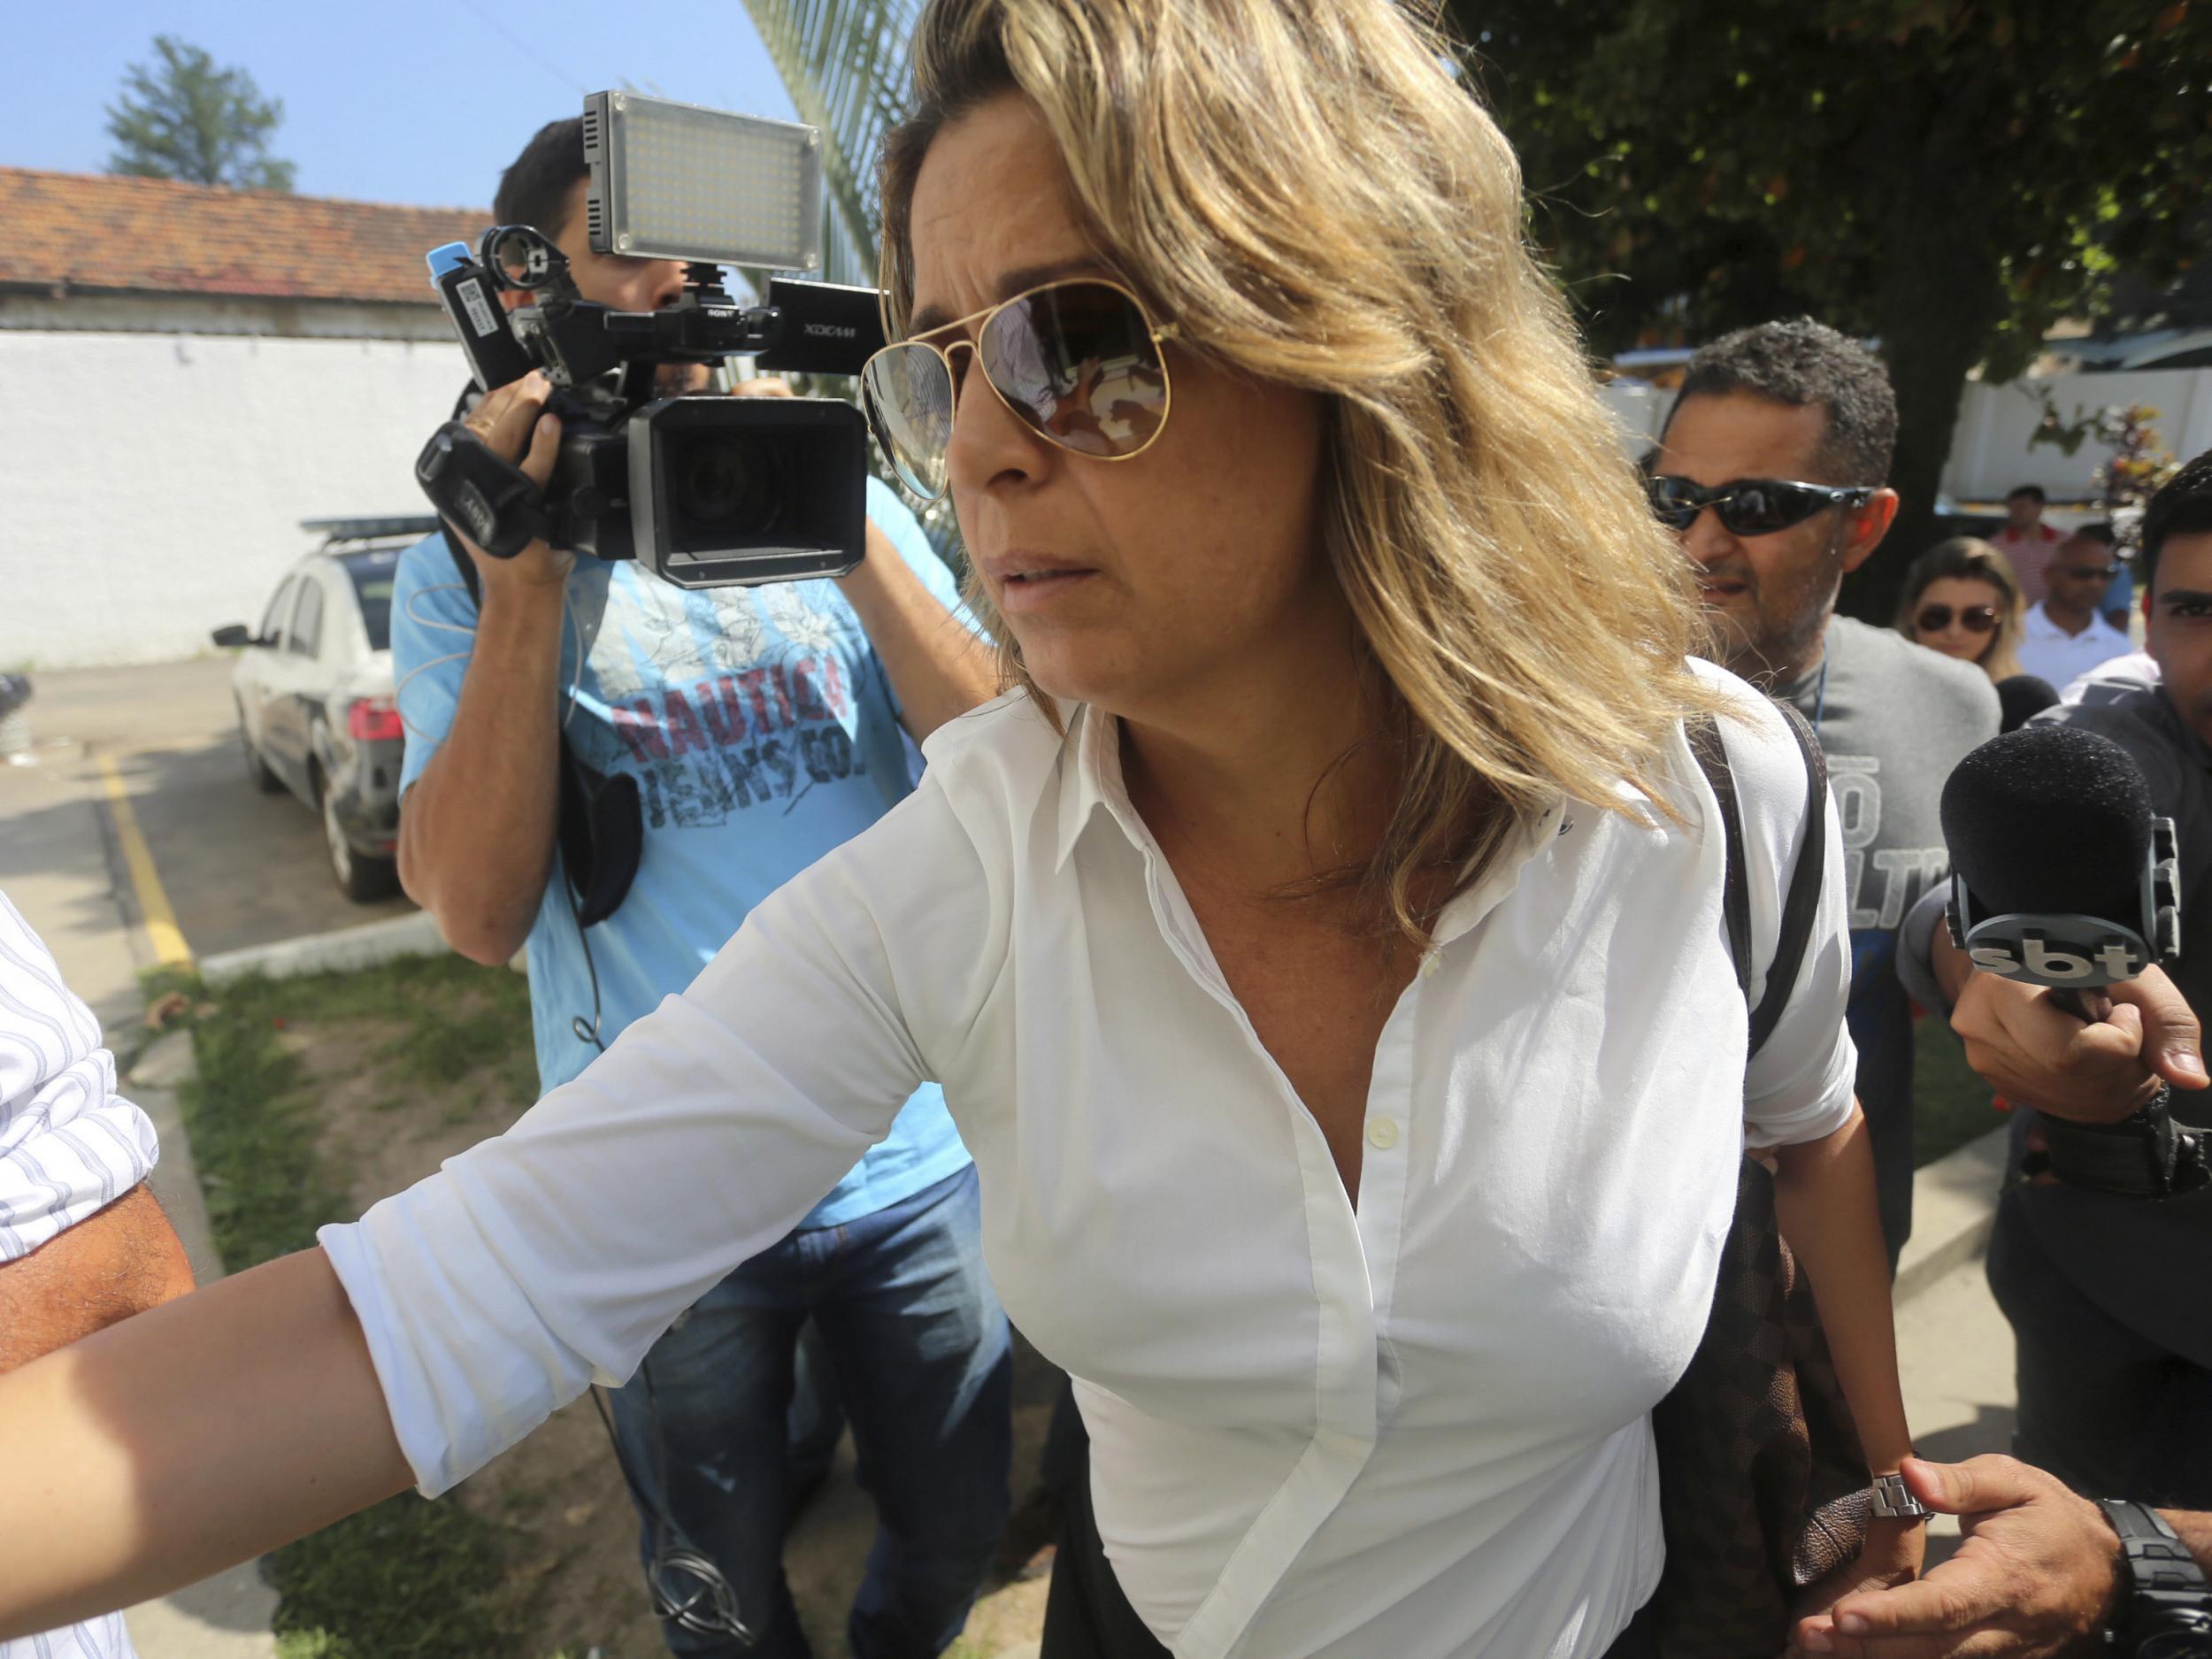 Francoise Amiridis, the wife of Greece's Ambassador to Brazil Kyriakos Amiridis, arrives at a police station to be interrogated in connection with her husband's disappearance in Belford Roxo (AP )